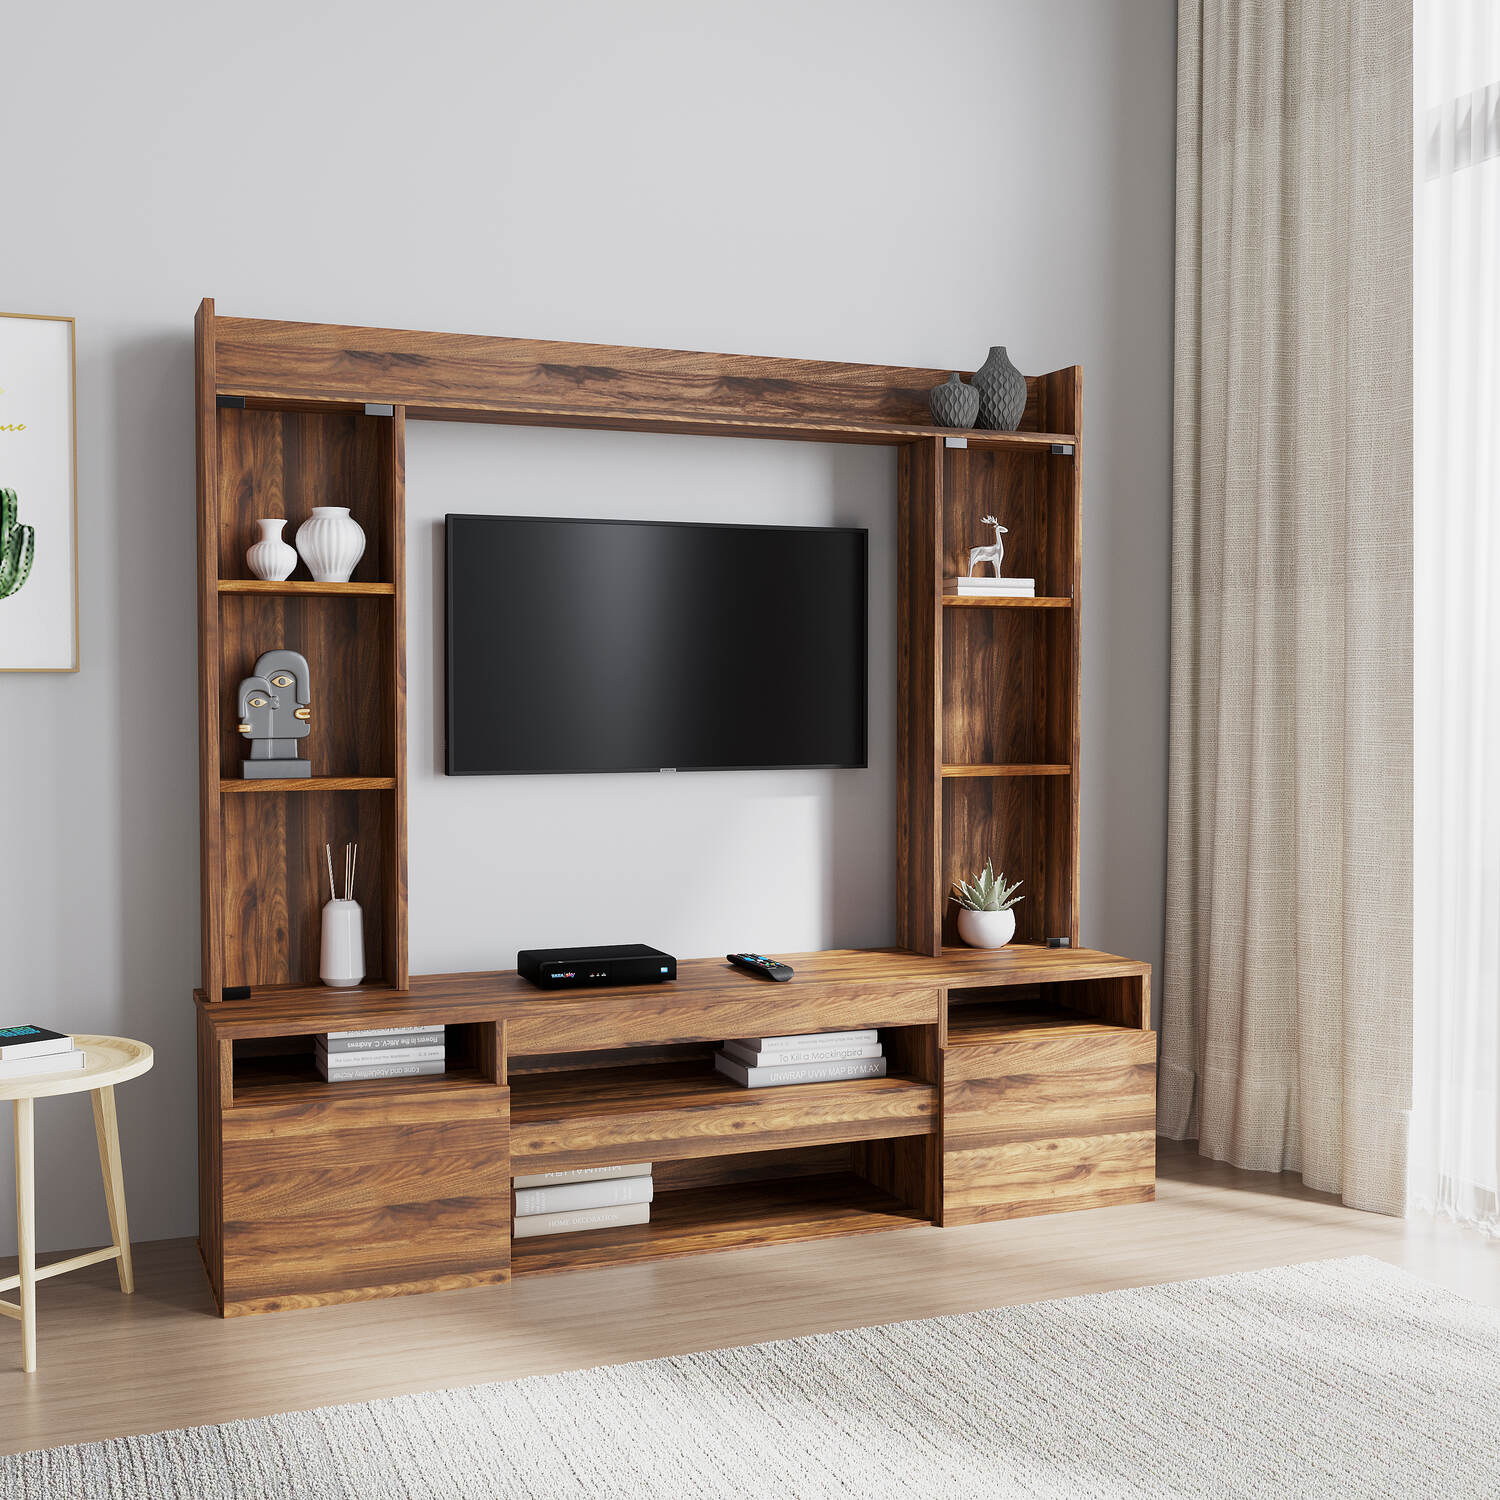 Buy Walton Wall Unit With Glass Shutter (Wenge)Online- At Home by Nilkamal